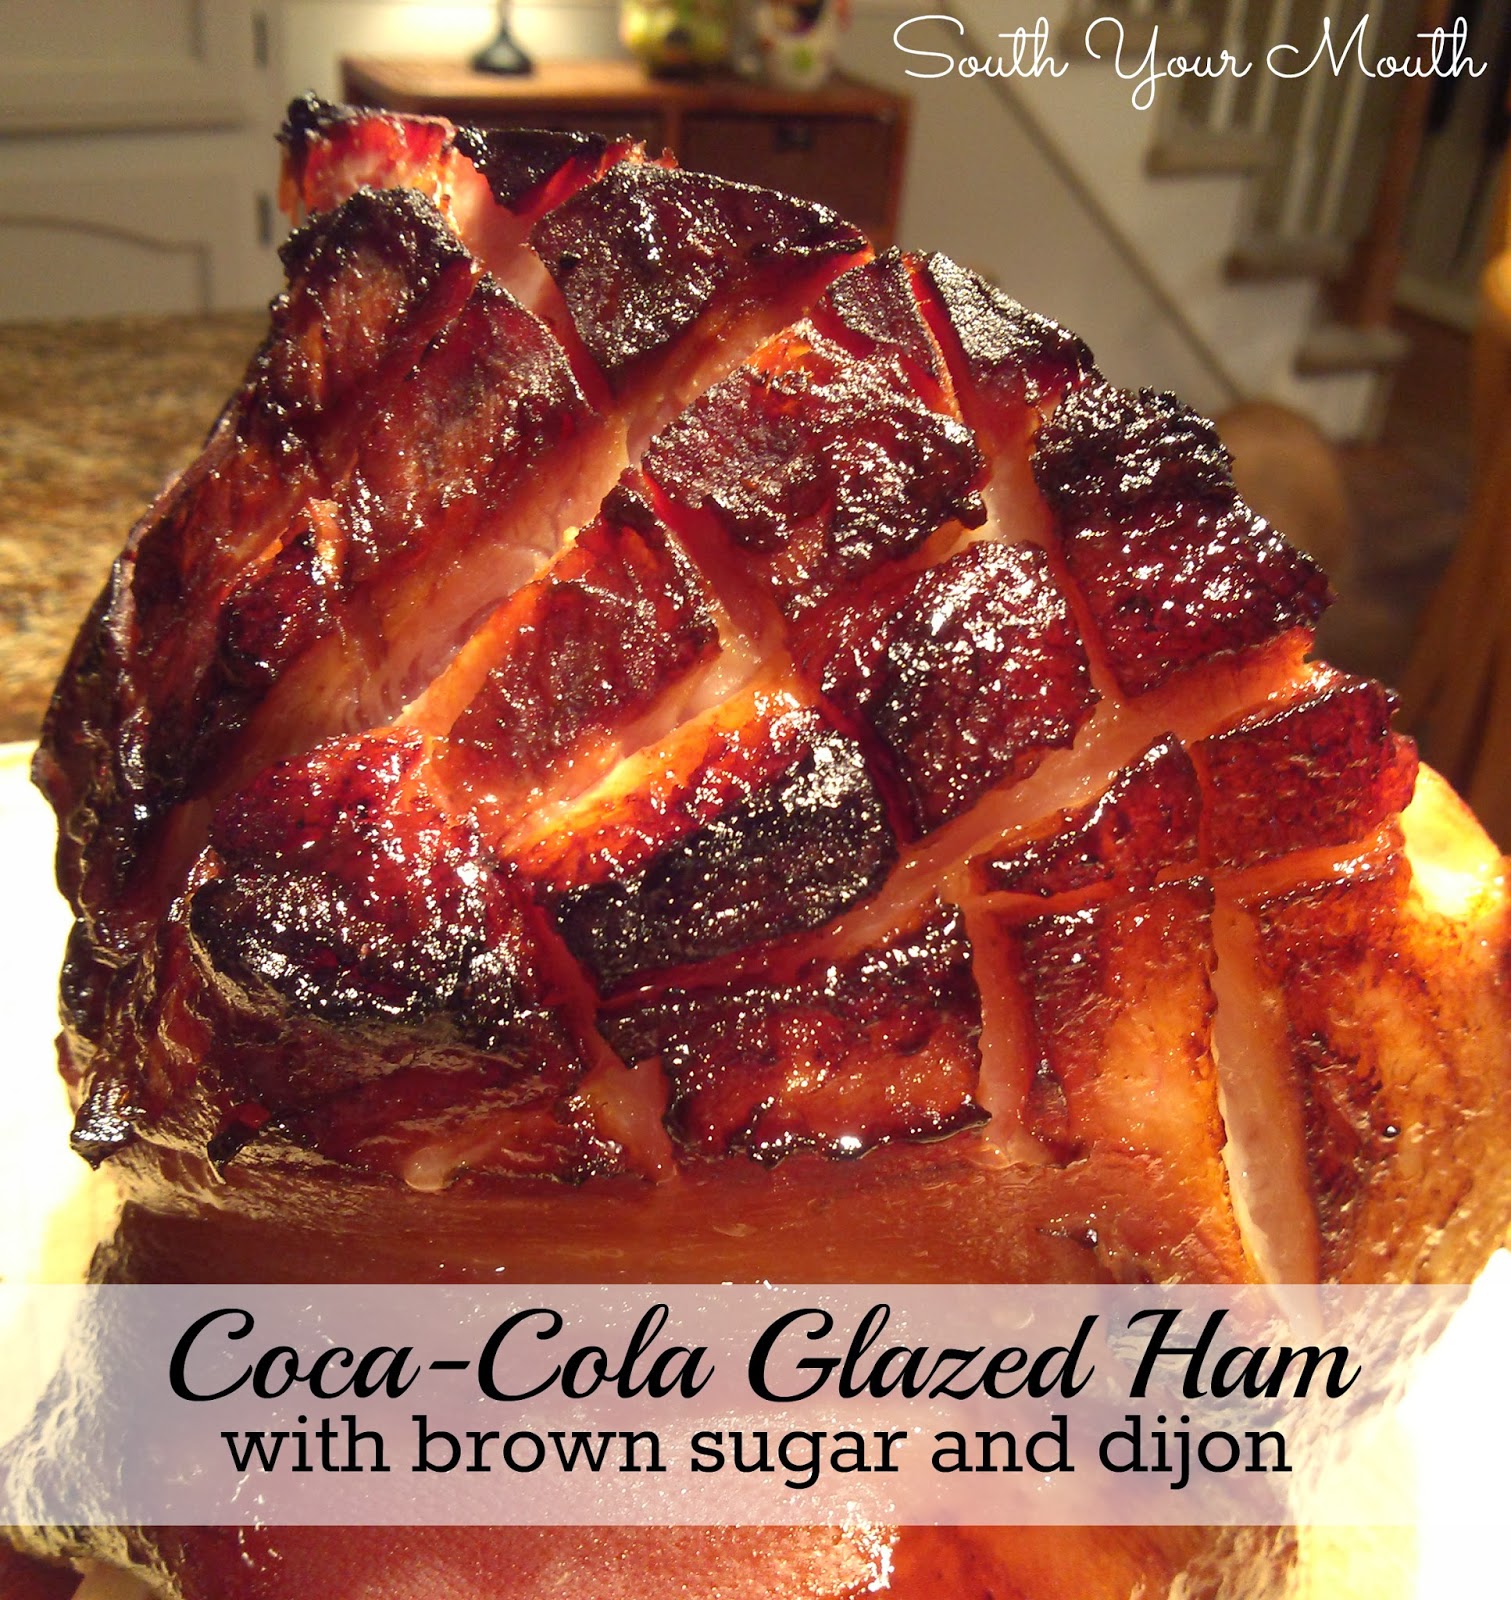 What are some ham recipes with Coca-Cola?